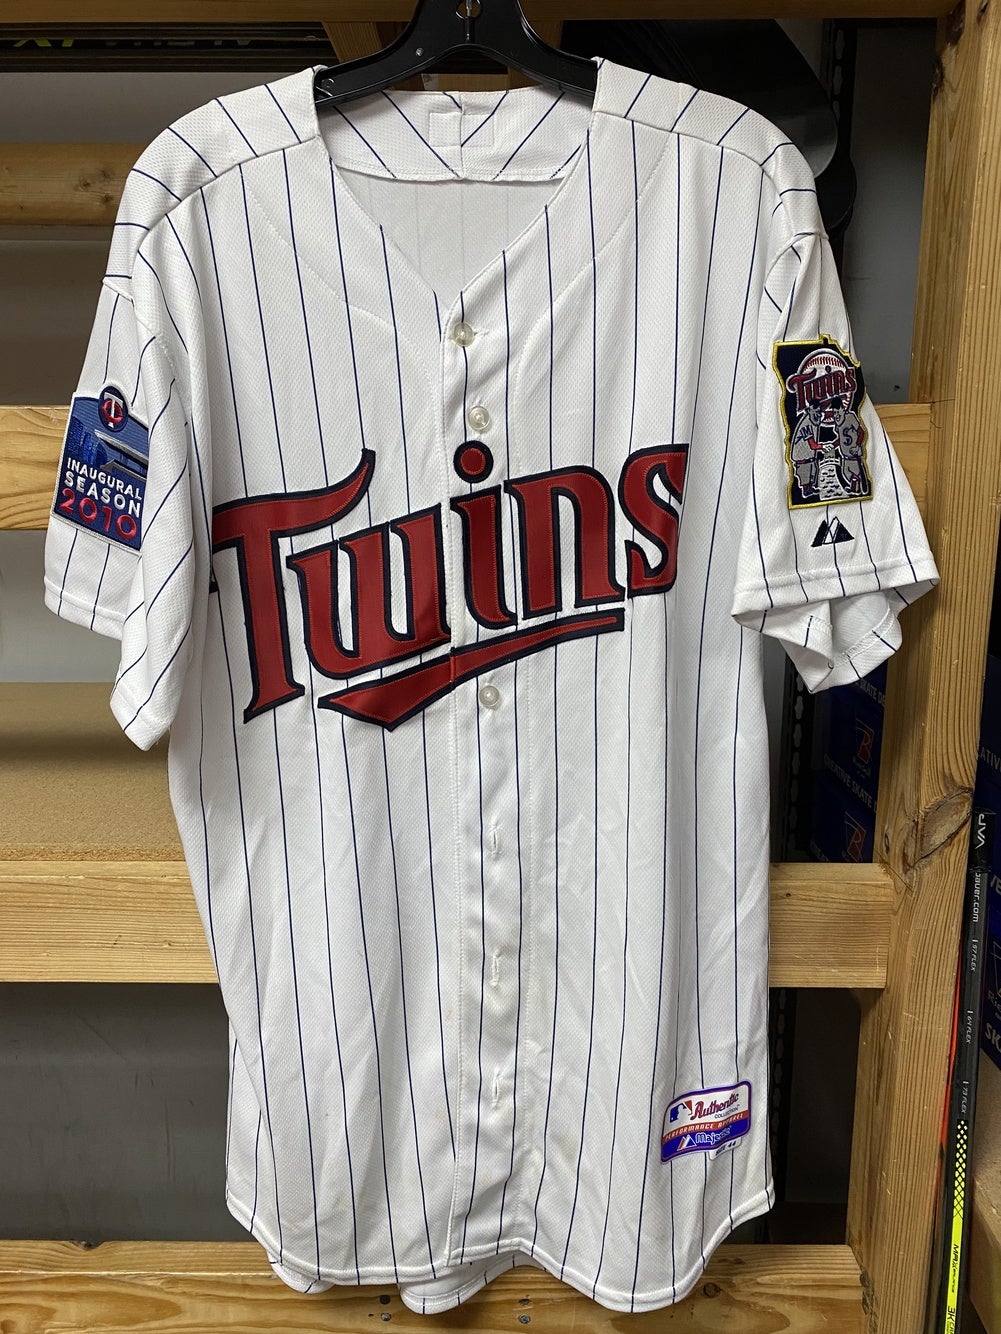 Vintage Minnesota Twins Jersey by Majestic Athletic Authentic 